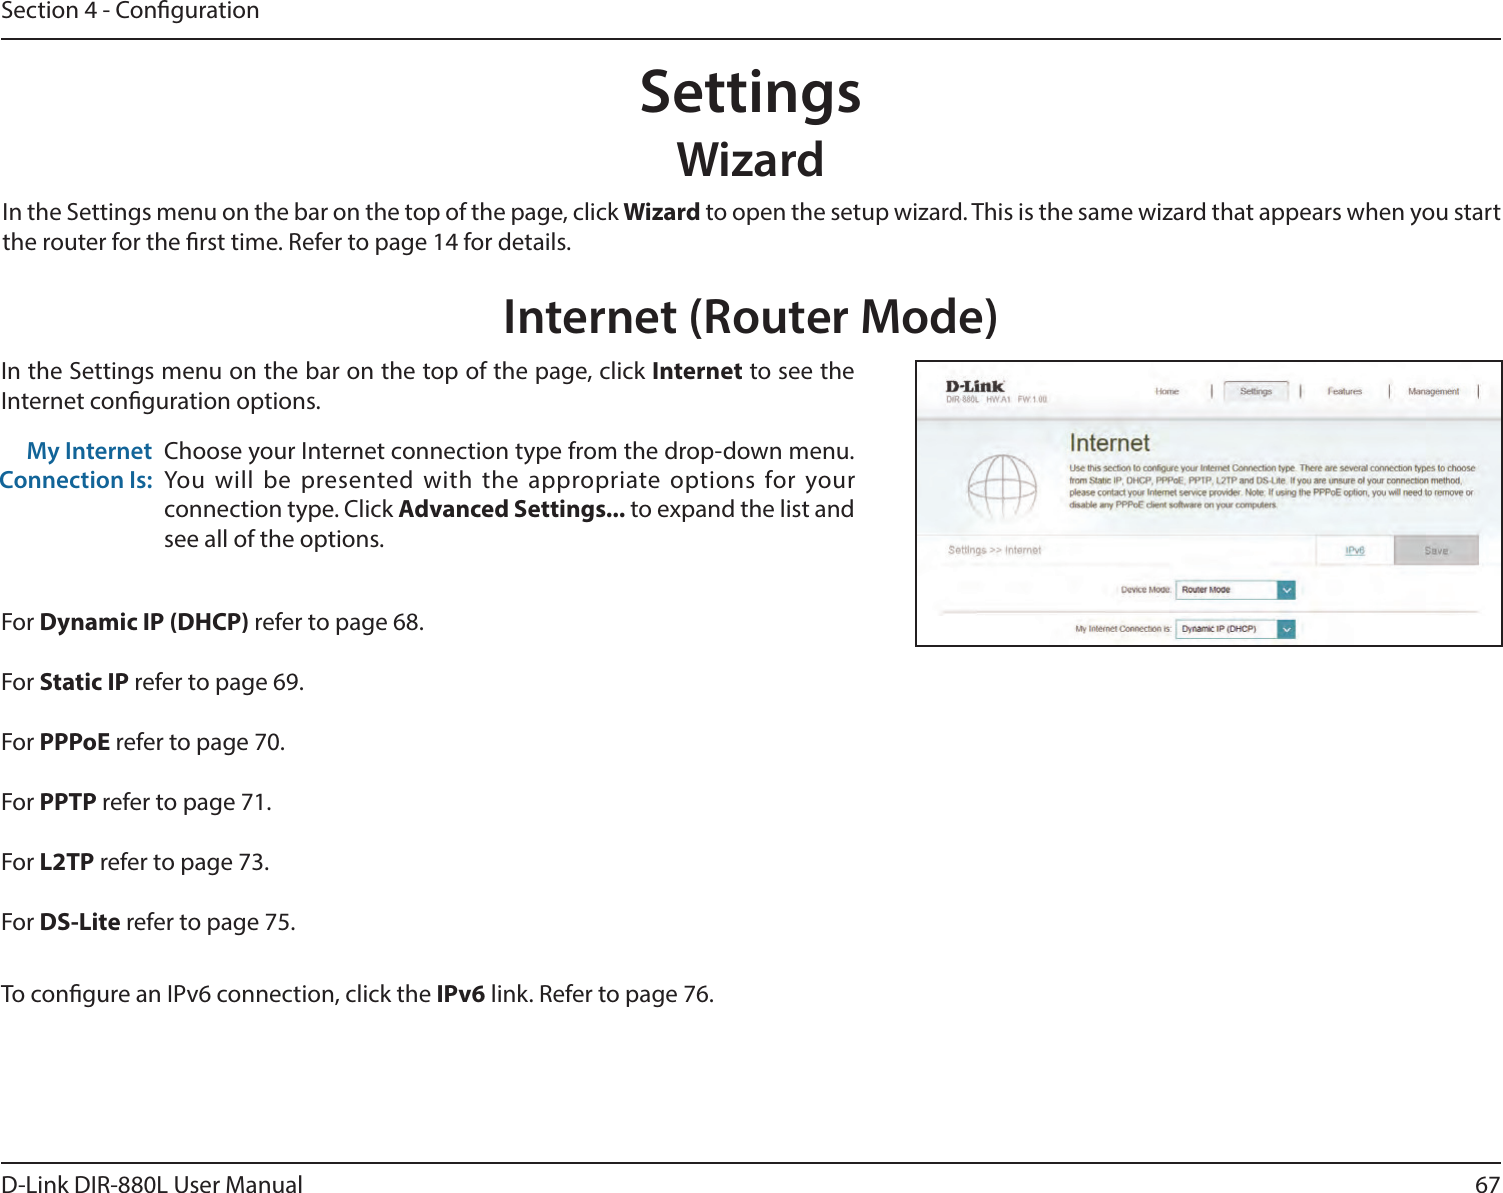 67D-Link DIR-880L User ManualSection 4 - CongurationSettingsWizardInternet (Router Mode)In the Settings menu on the bar on the top of the page, click Wizard to open the setup wizard. This is the same wizard that appears when you start the router for the rst time. Refer to page 14 for details.In the Settings menu on the bar on the top of the page, click Internet to see the Internet conguration options.Choose your Internet connection type from the drop-down menu. You  will  be  presented  with  the  appropriate  options for  your connection type. Click Advanced Settings... to expand the list and see all of the options.My Internet Connection Is:For Dynamic IP (DHCP) refer to page 68.For Static IP refer to page 69.For PPPoE refer to page 70.For PPTP refer to page 71.For L2TP refer to page 73.For DS-Lite refer to page 75.To congure an IPv6 connection, click the IPv6 link. Refer to page 76.